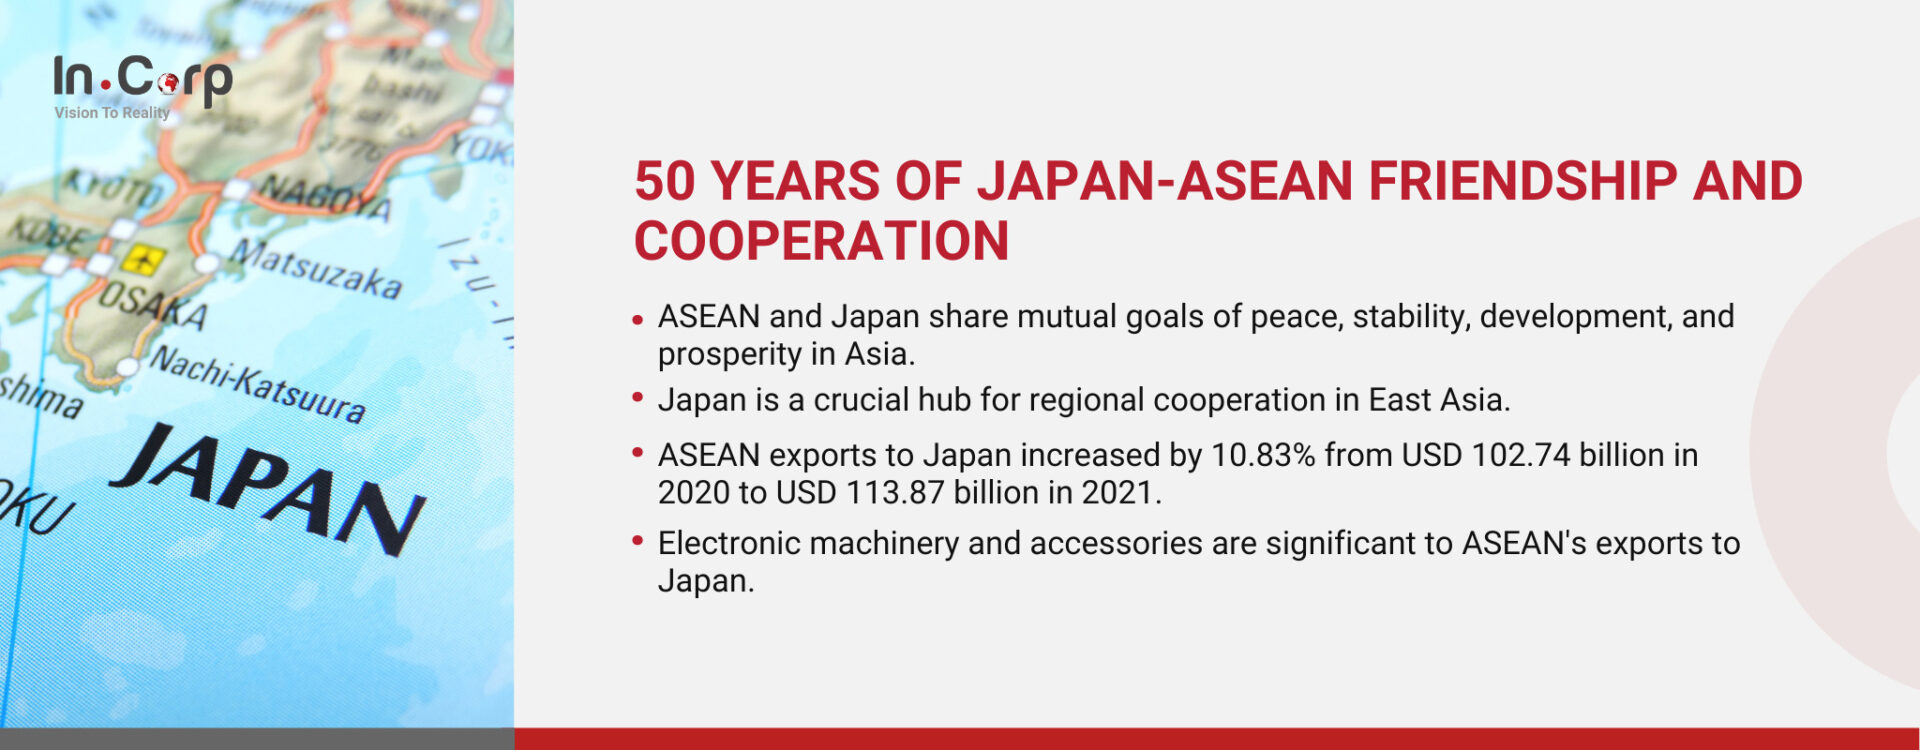 Indonesia's Role in Japan-ASEAN Partnership